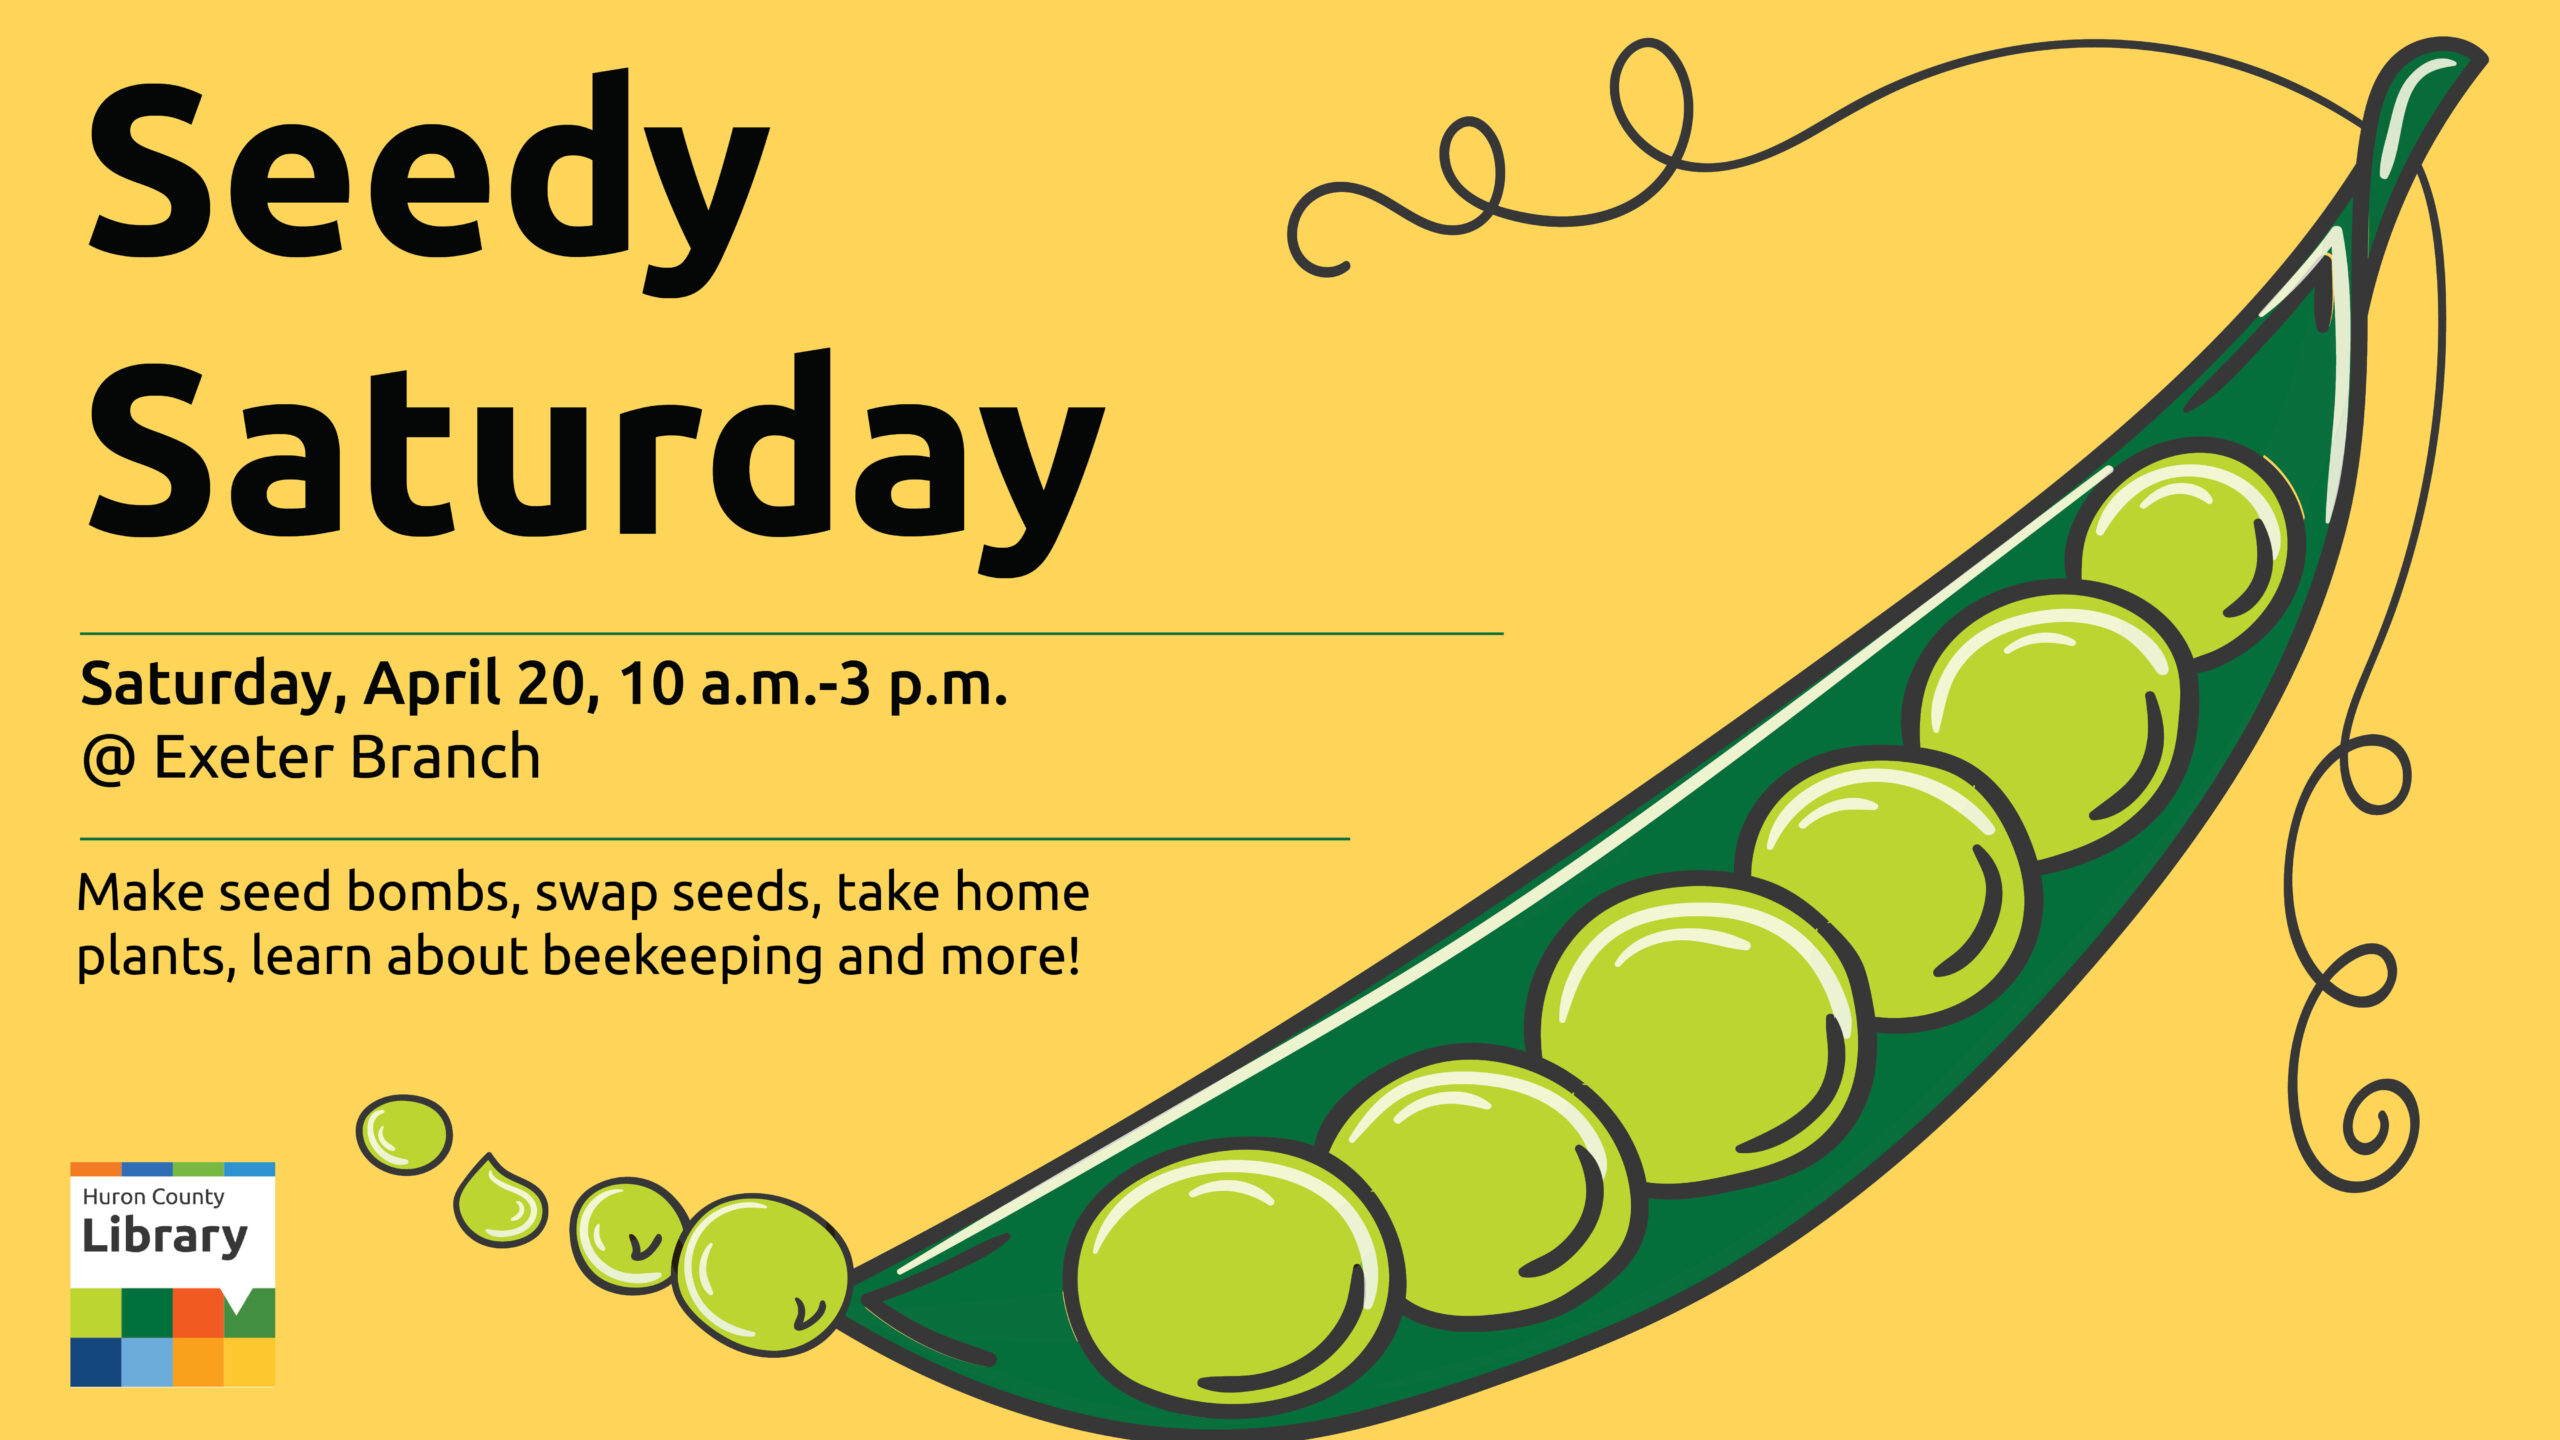 Illustration of peas in a pod with text promoting Seed Saturday at Exeter